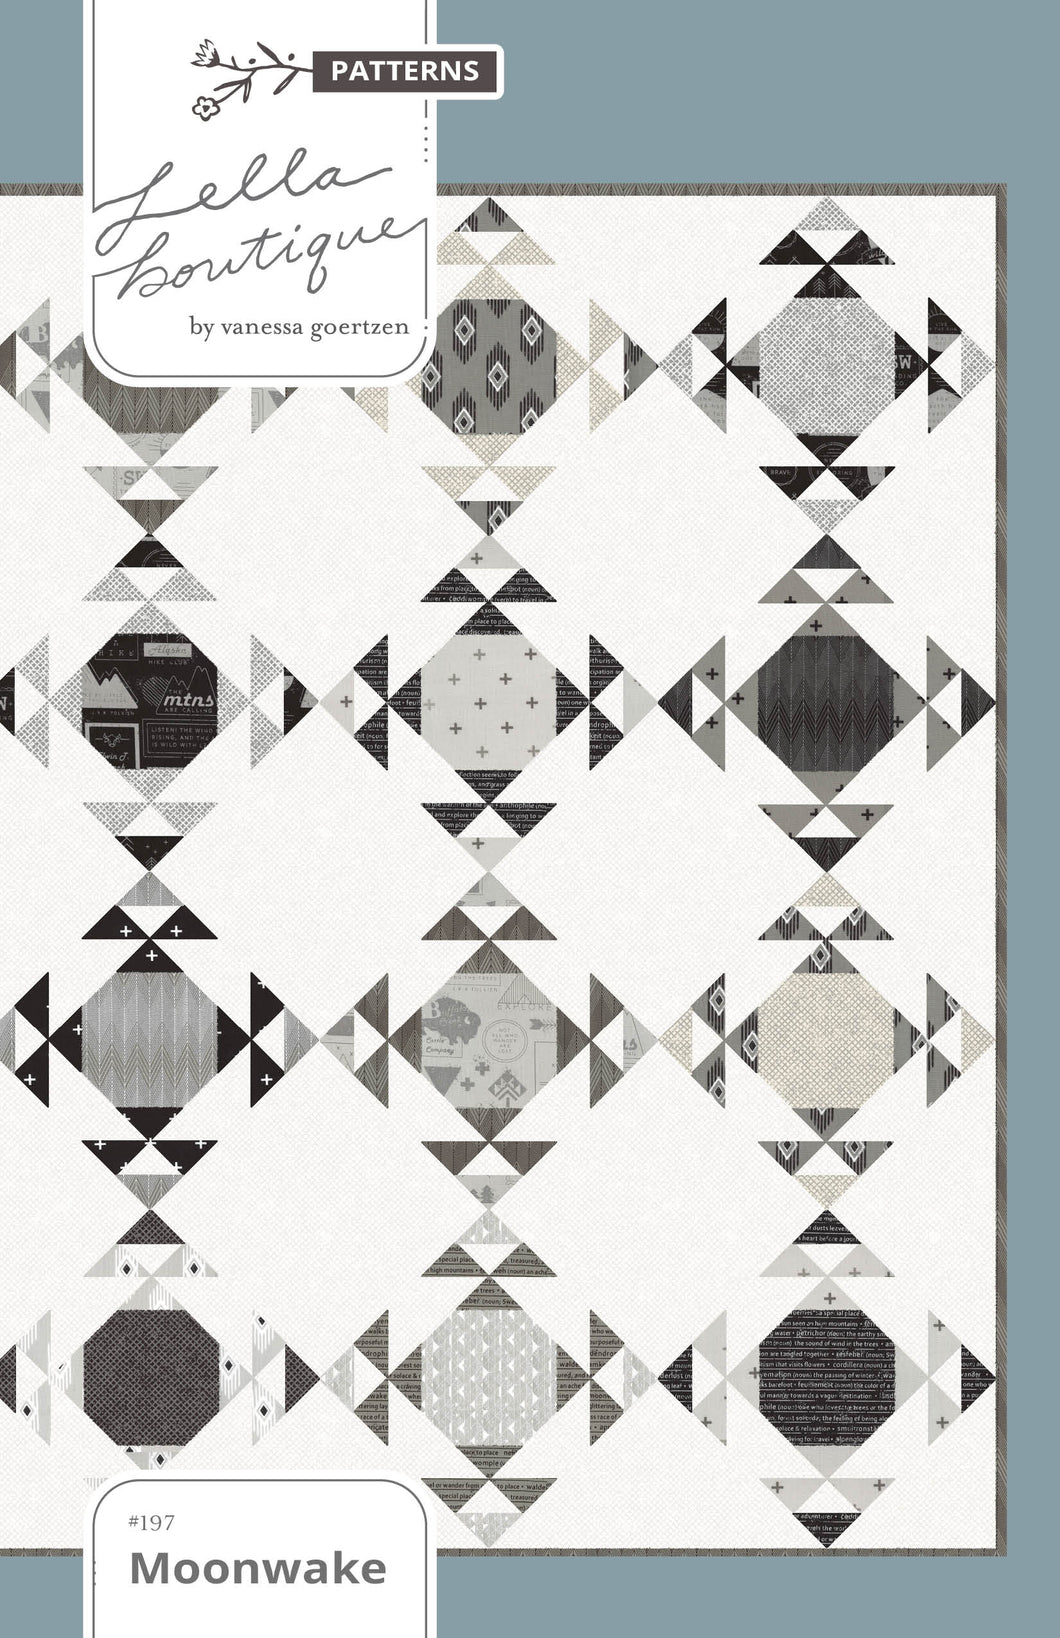 Moonwake geometric fat quarter quilt by Lella Boutique. Cool triangle design in Smoke & Rust fabric. Modern meets traditional quilt depending on fabric choices. Would make a good boy quilt! Download the pattern here.